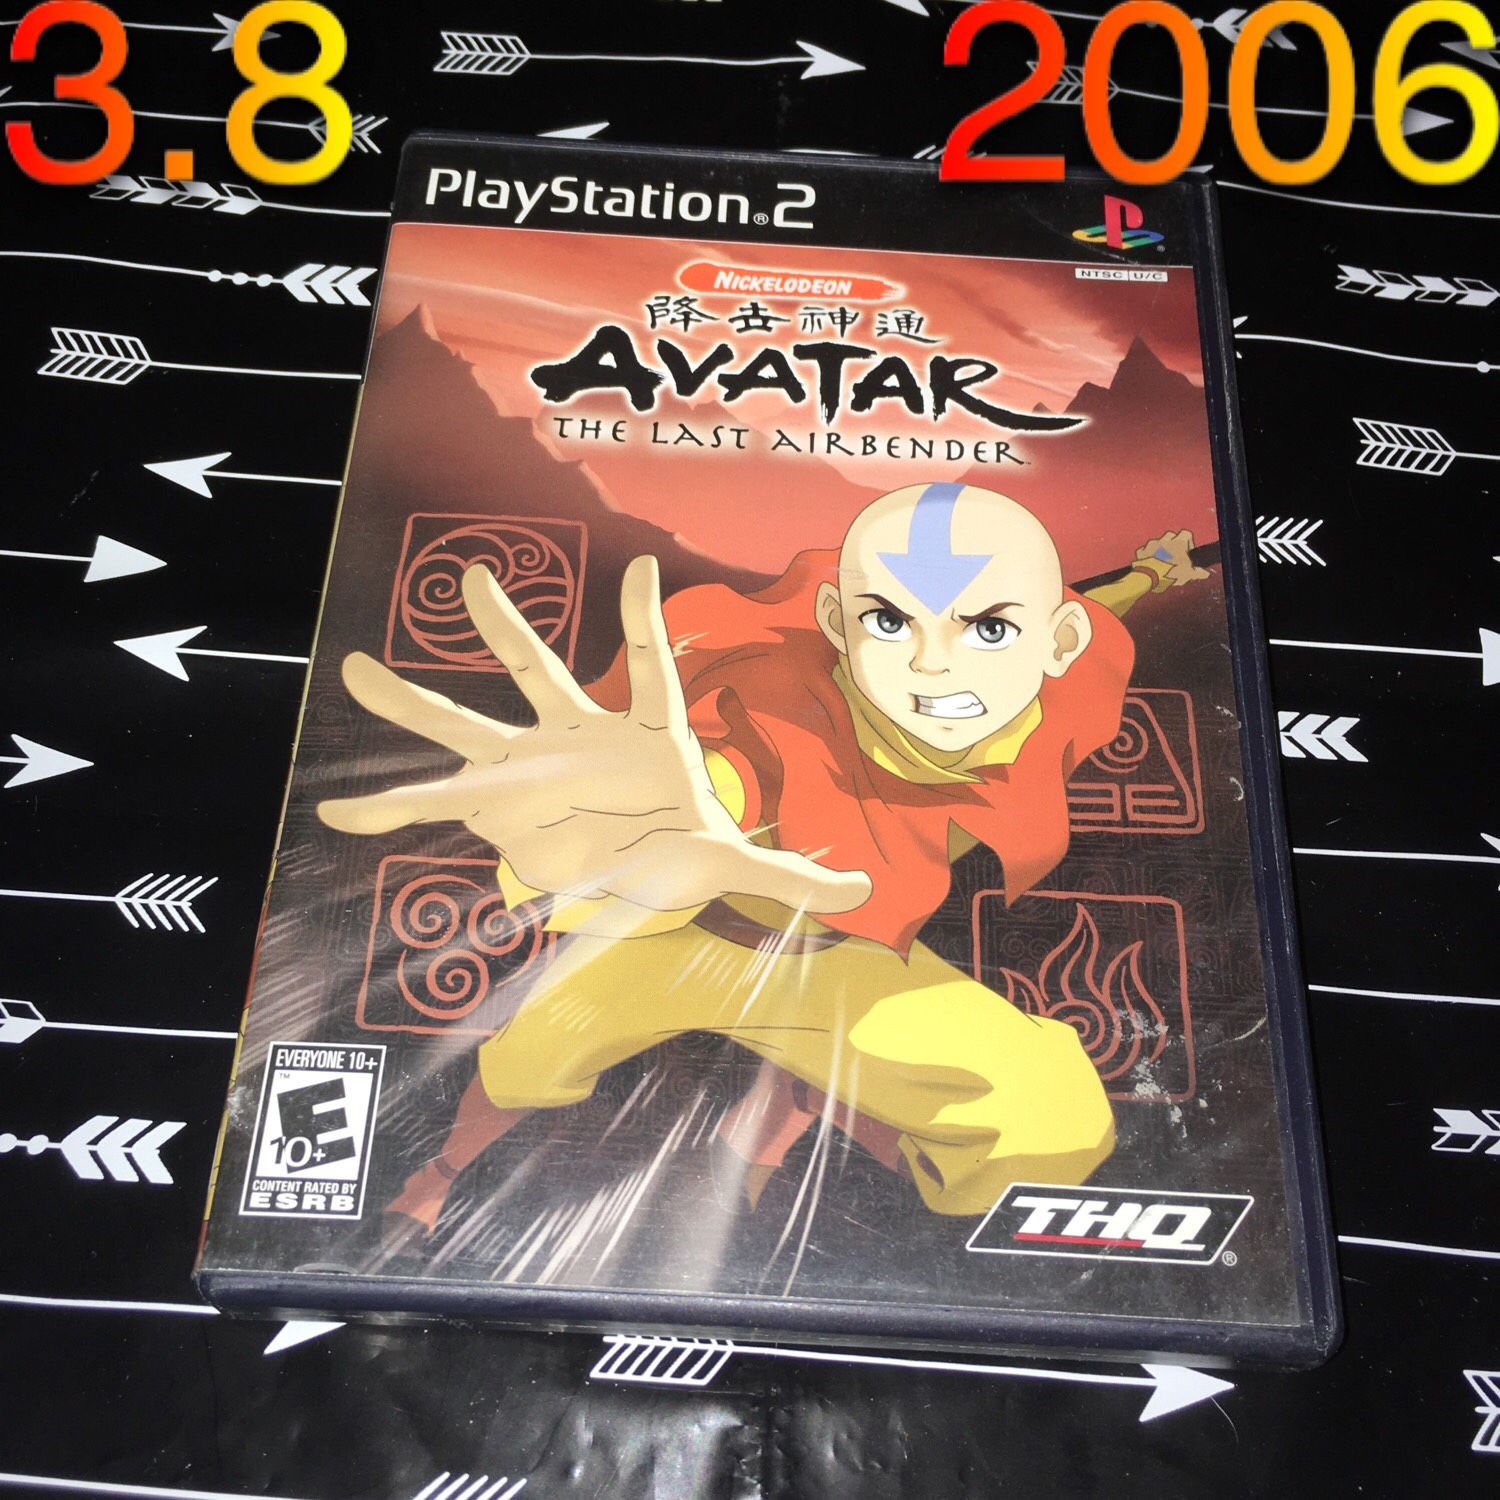 2006 PS2 Avatar The Last Airbender game